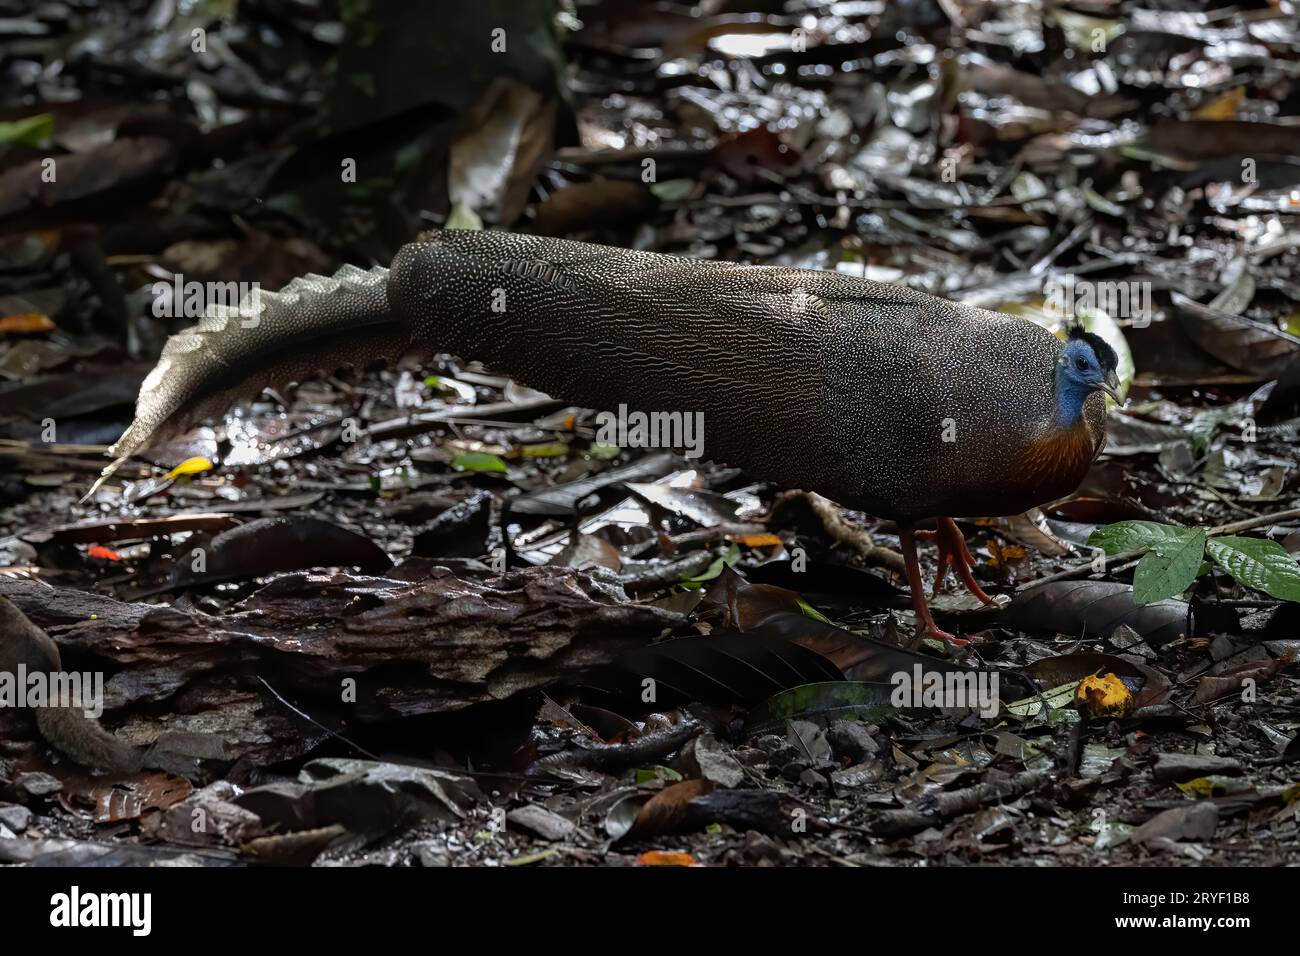 Nature wildlife image of The Great Argus in the deep jungle in Sabah, Borneo Stock Photo